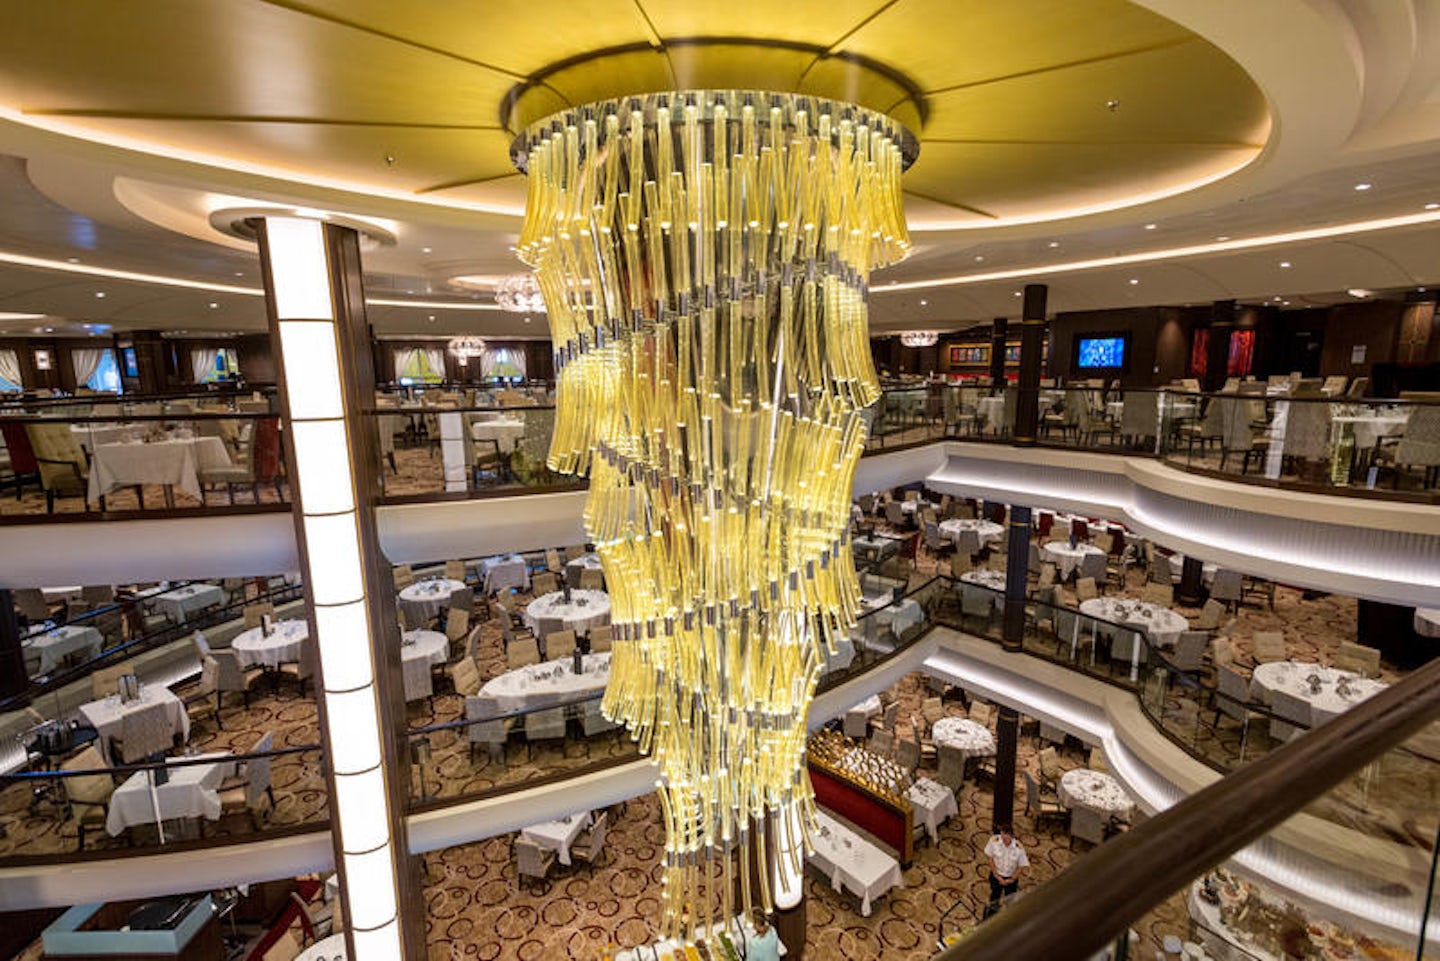 Main Dining Room On Symphony Of The Seas